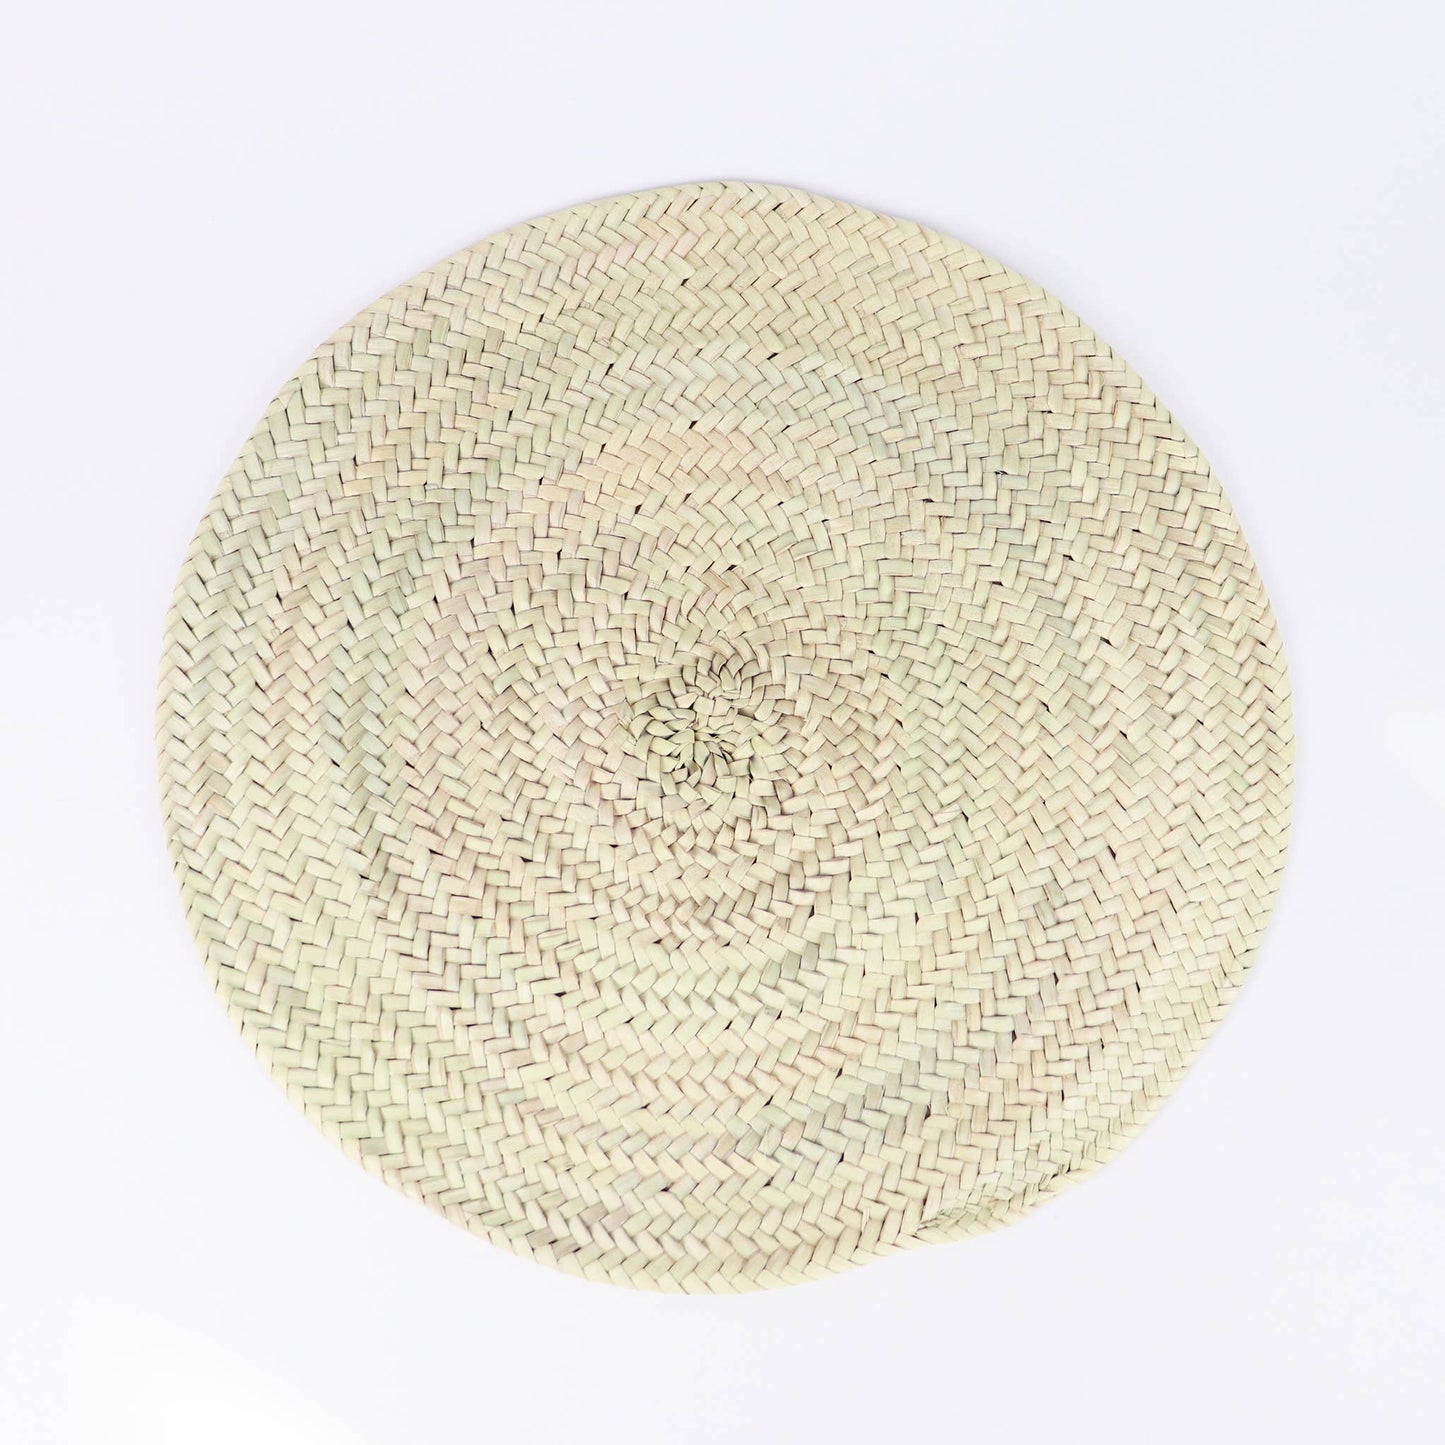 Straw Round Placemat